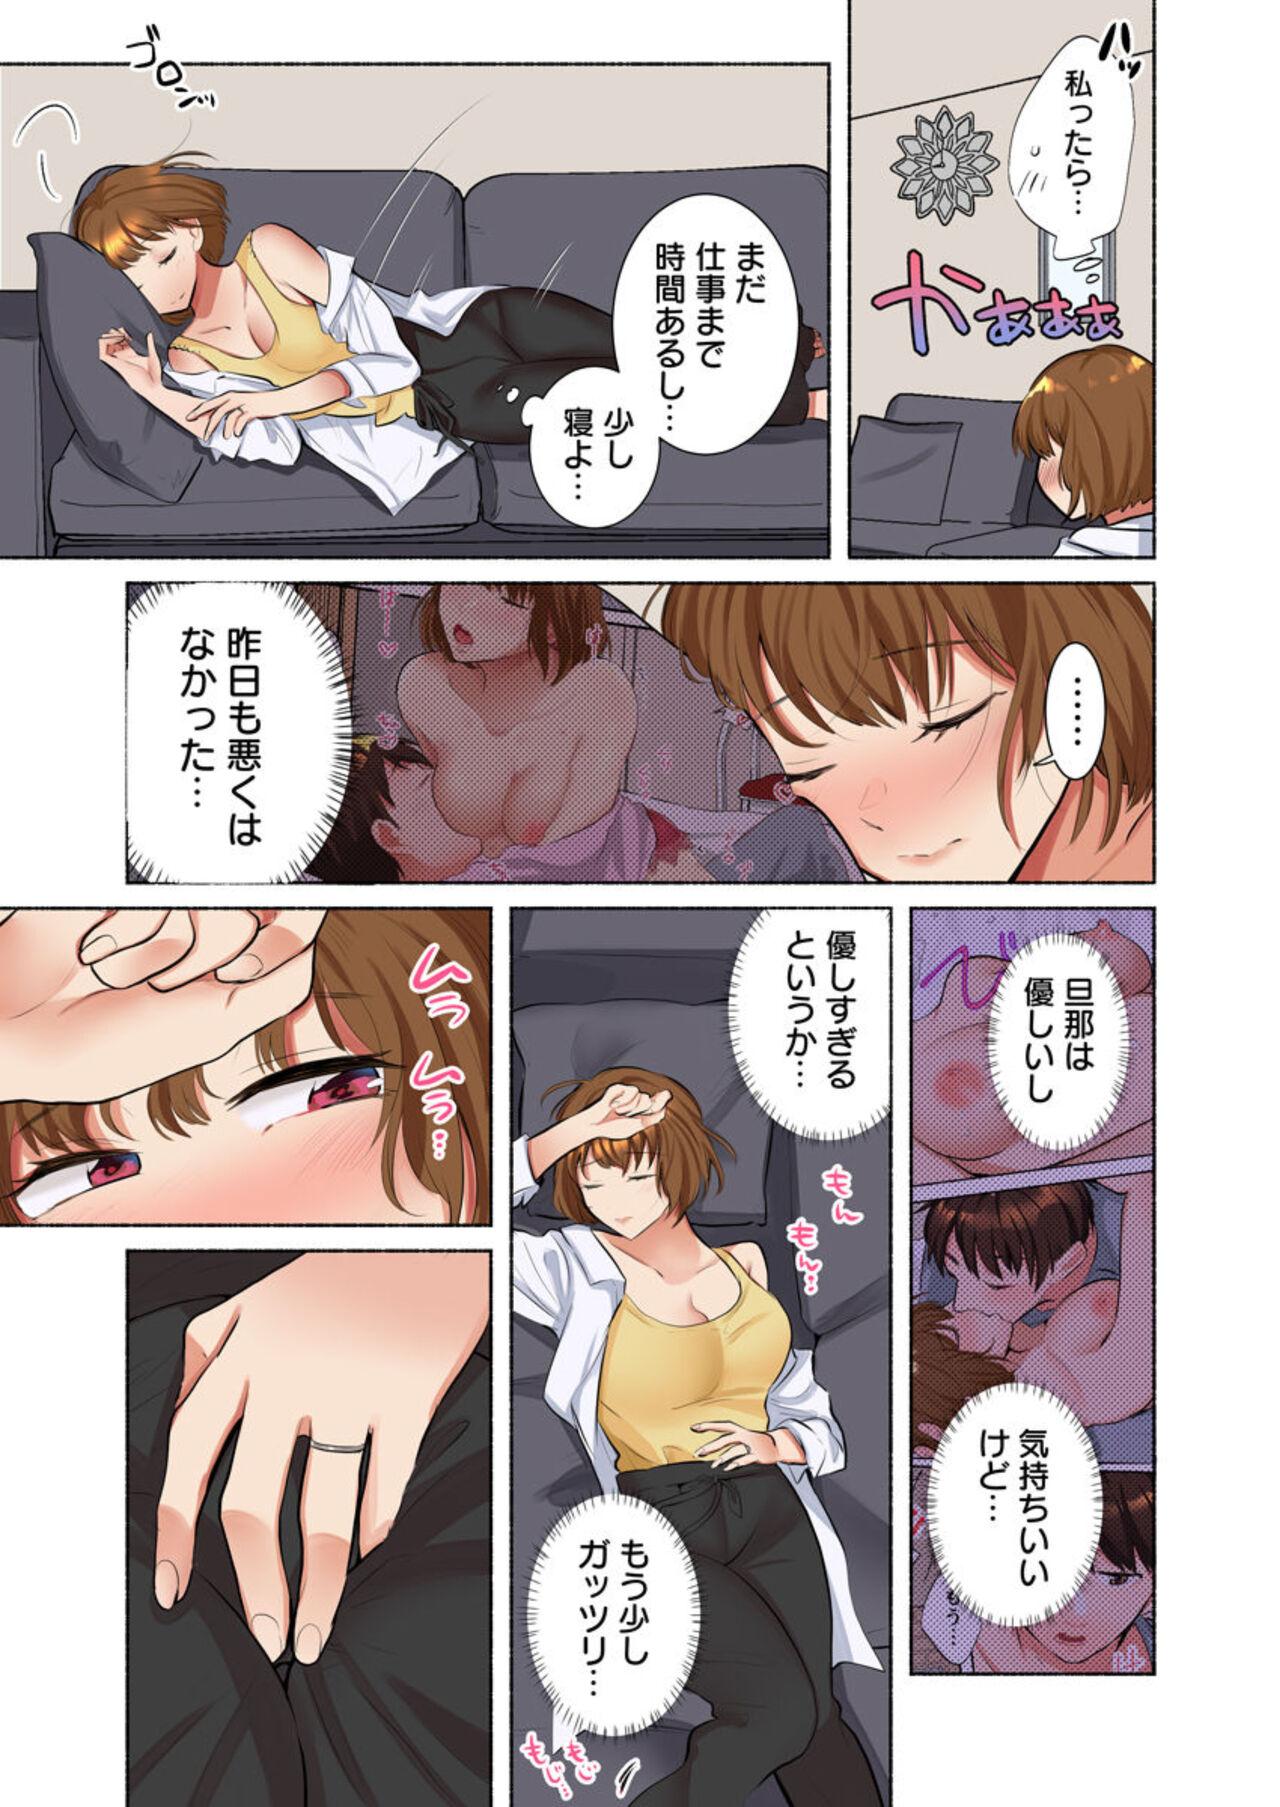 [Ika Hotaru] My Neighbor Is A Sadistic Ex-Boyfriend ~I Love My Husband, But My Aching Body Has Been Redeveloped~ (Full Color) 1 10